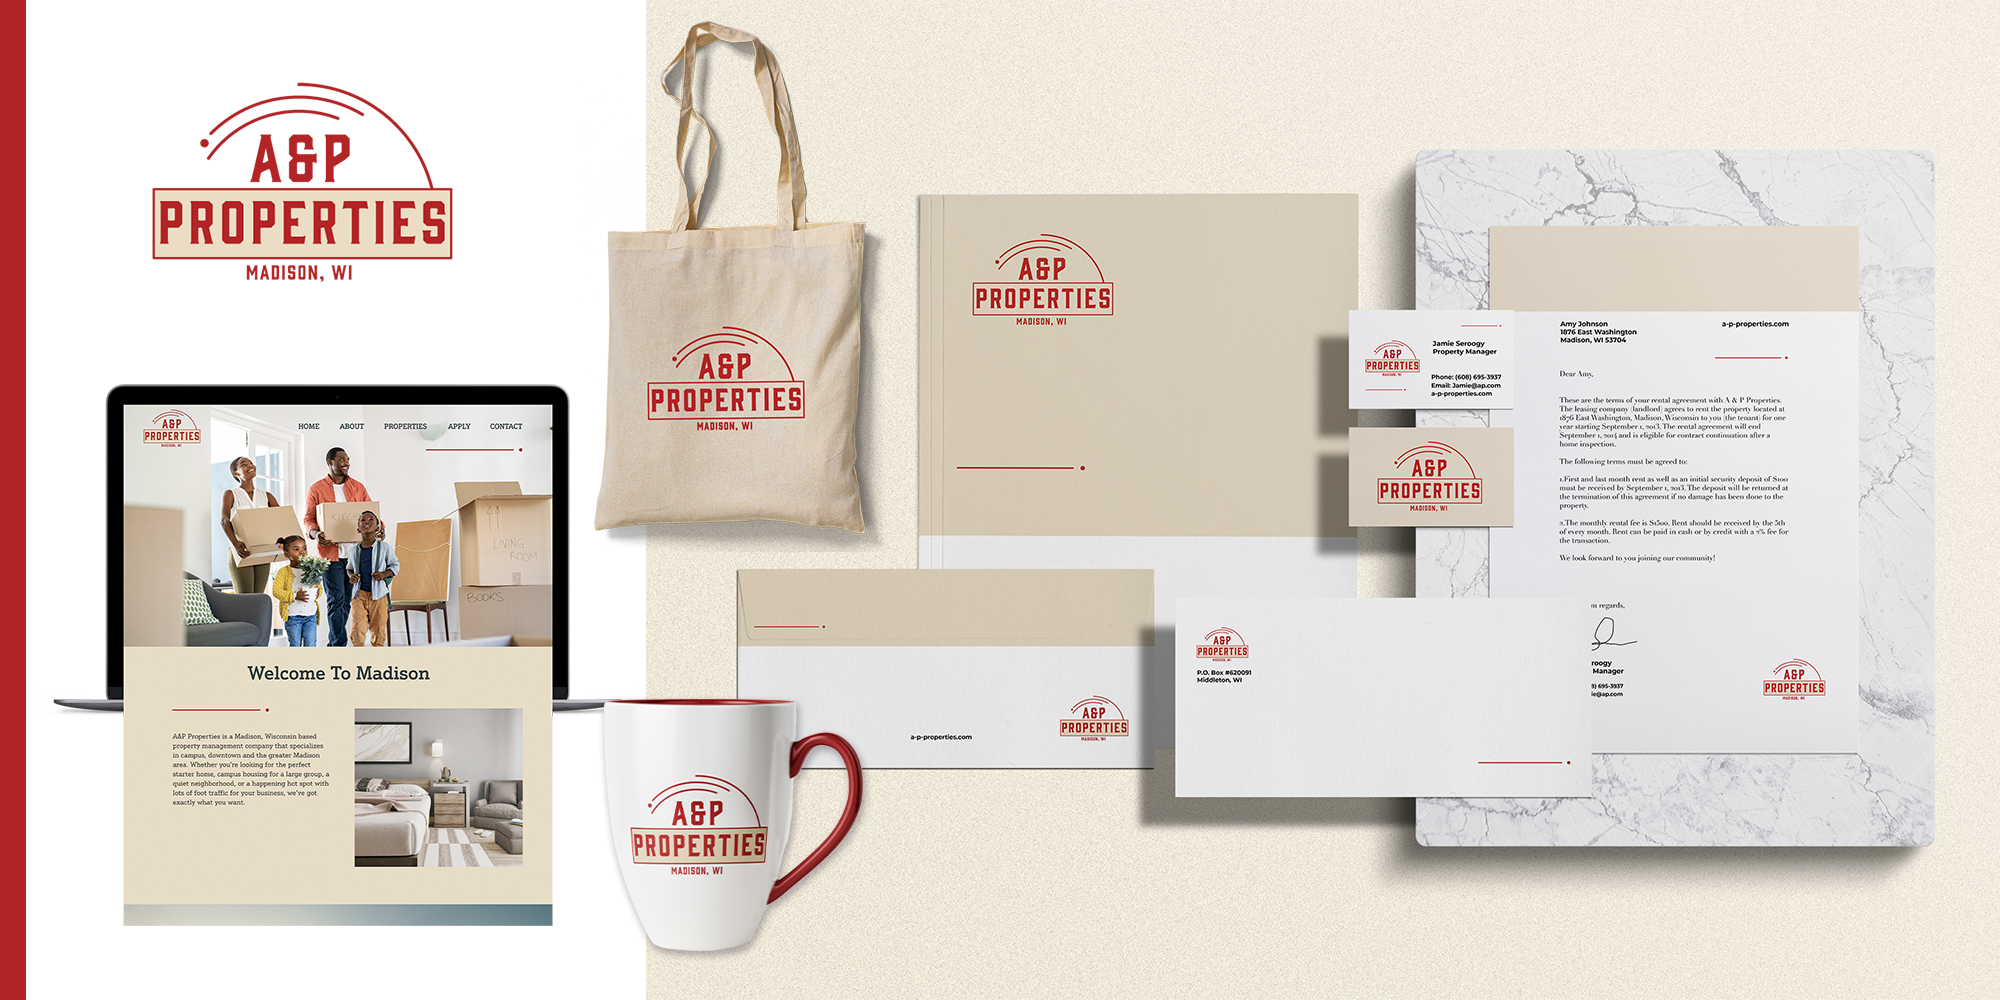 A mock suite of logo design, branding, and web design for A & P Properties by Tingalls intern Jamie Seroogy.